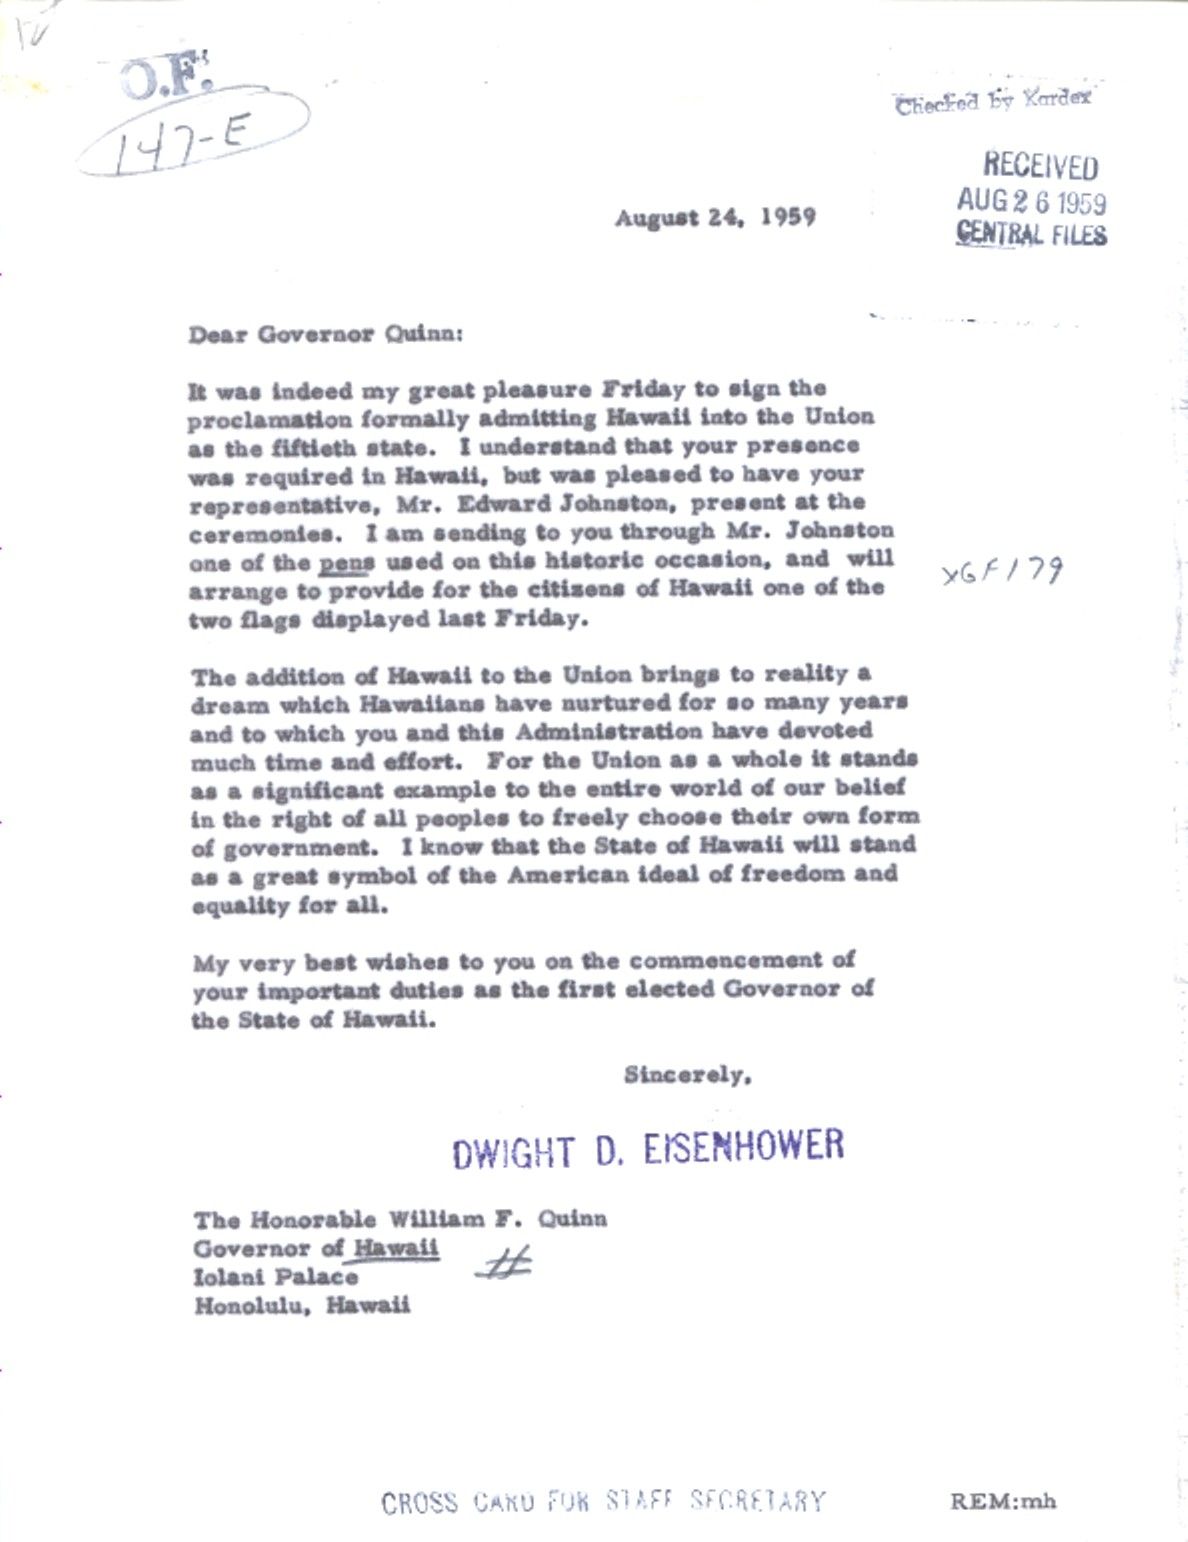 letter to the Governor of Hawaii, William Quinn